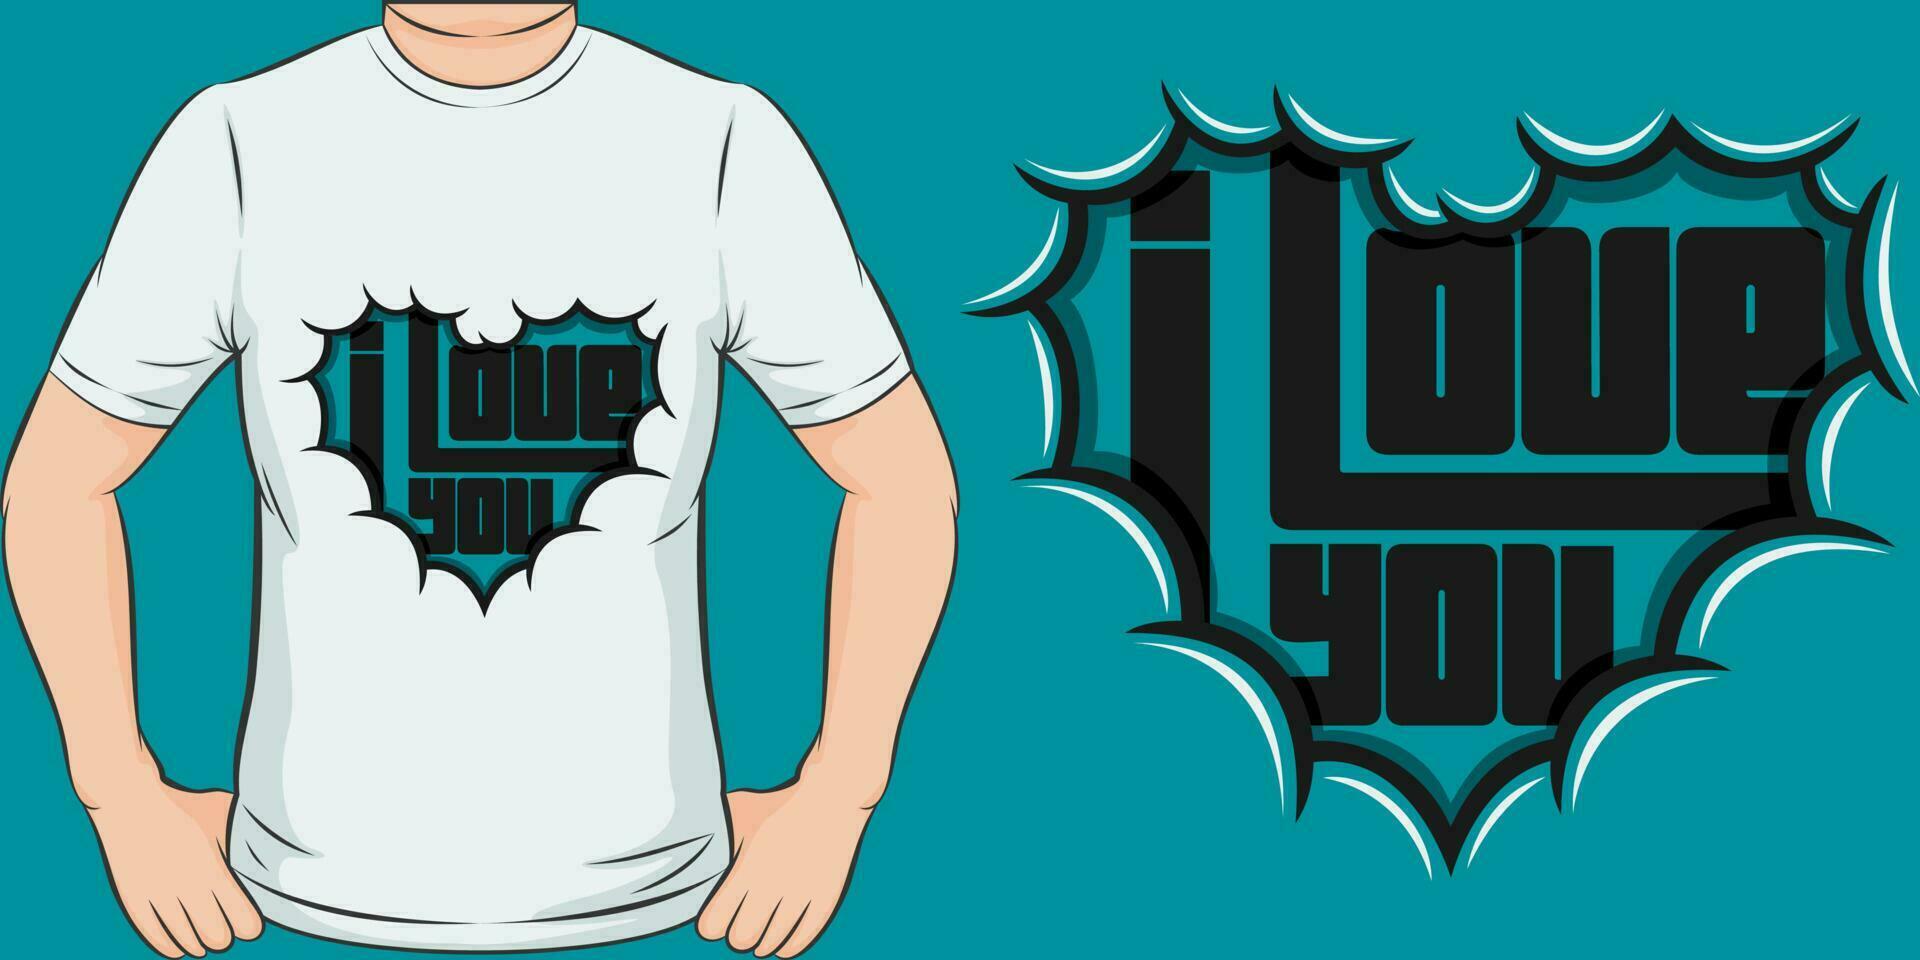 I Love You, Love Quote T-Shirt Design. vector